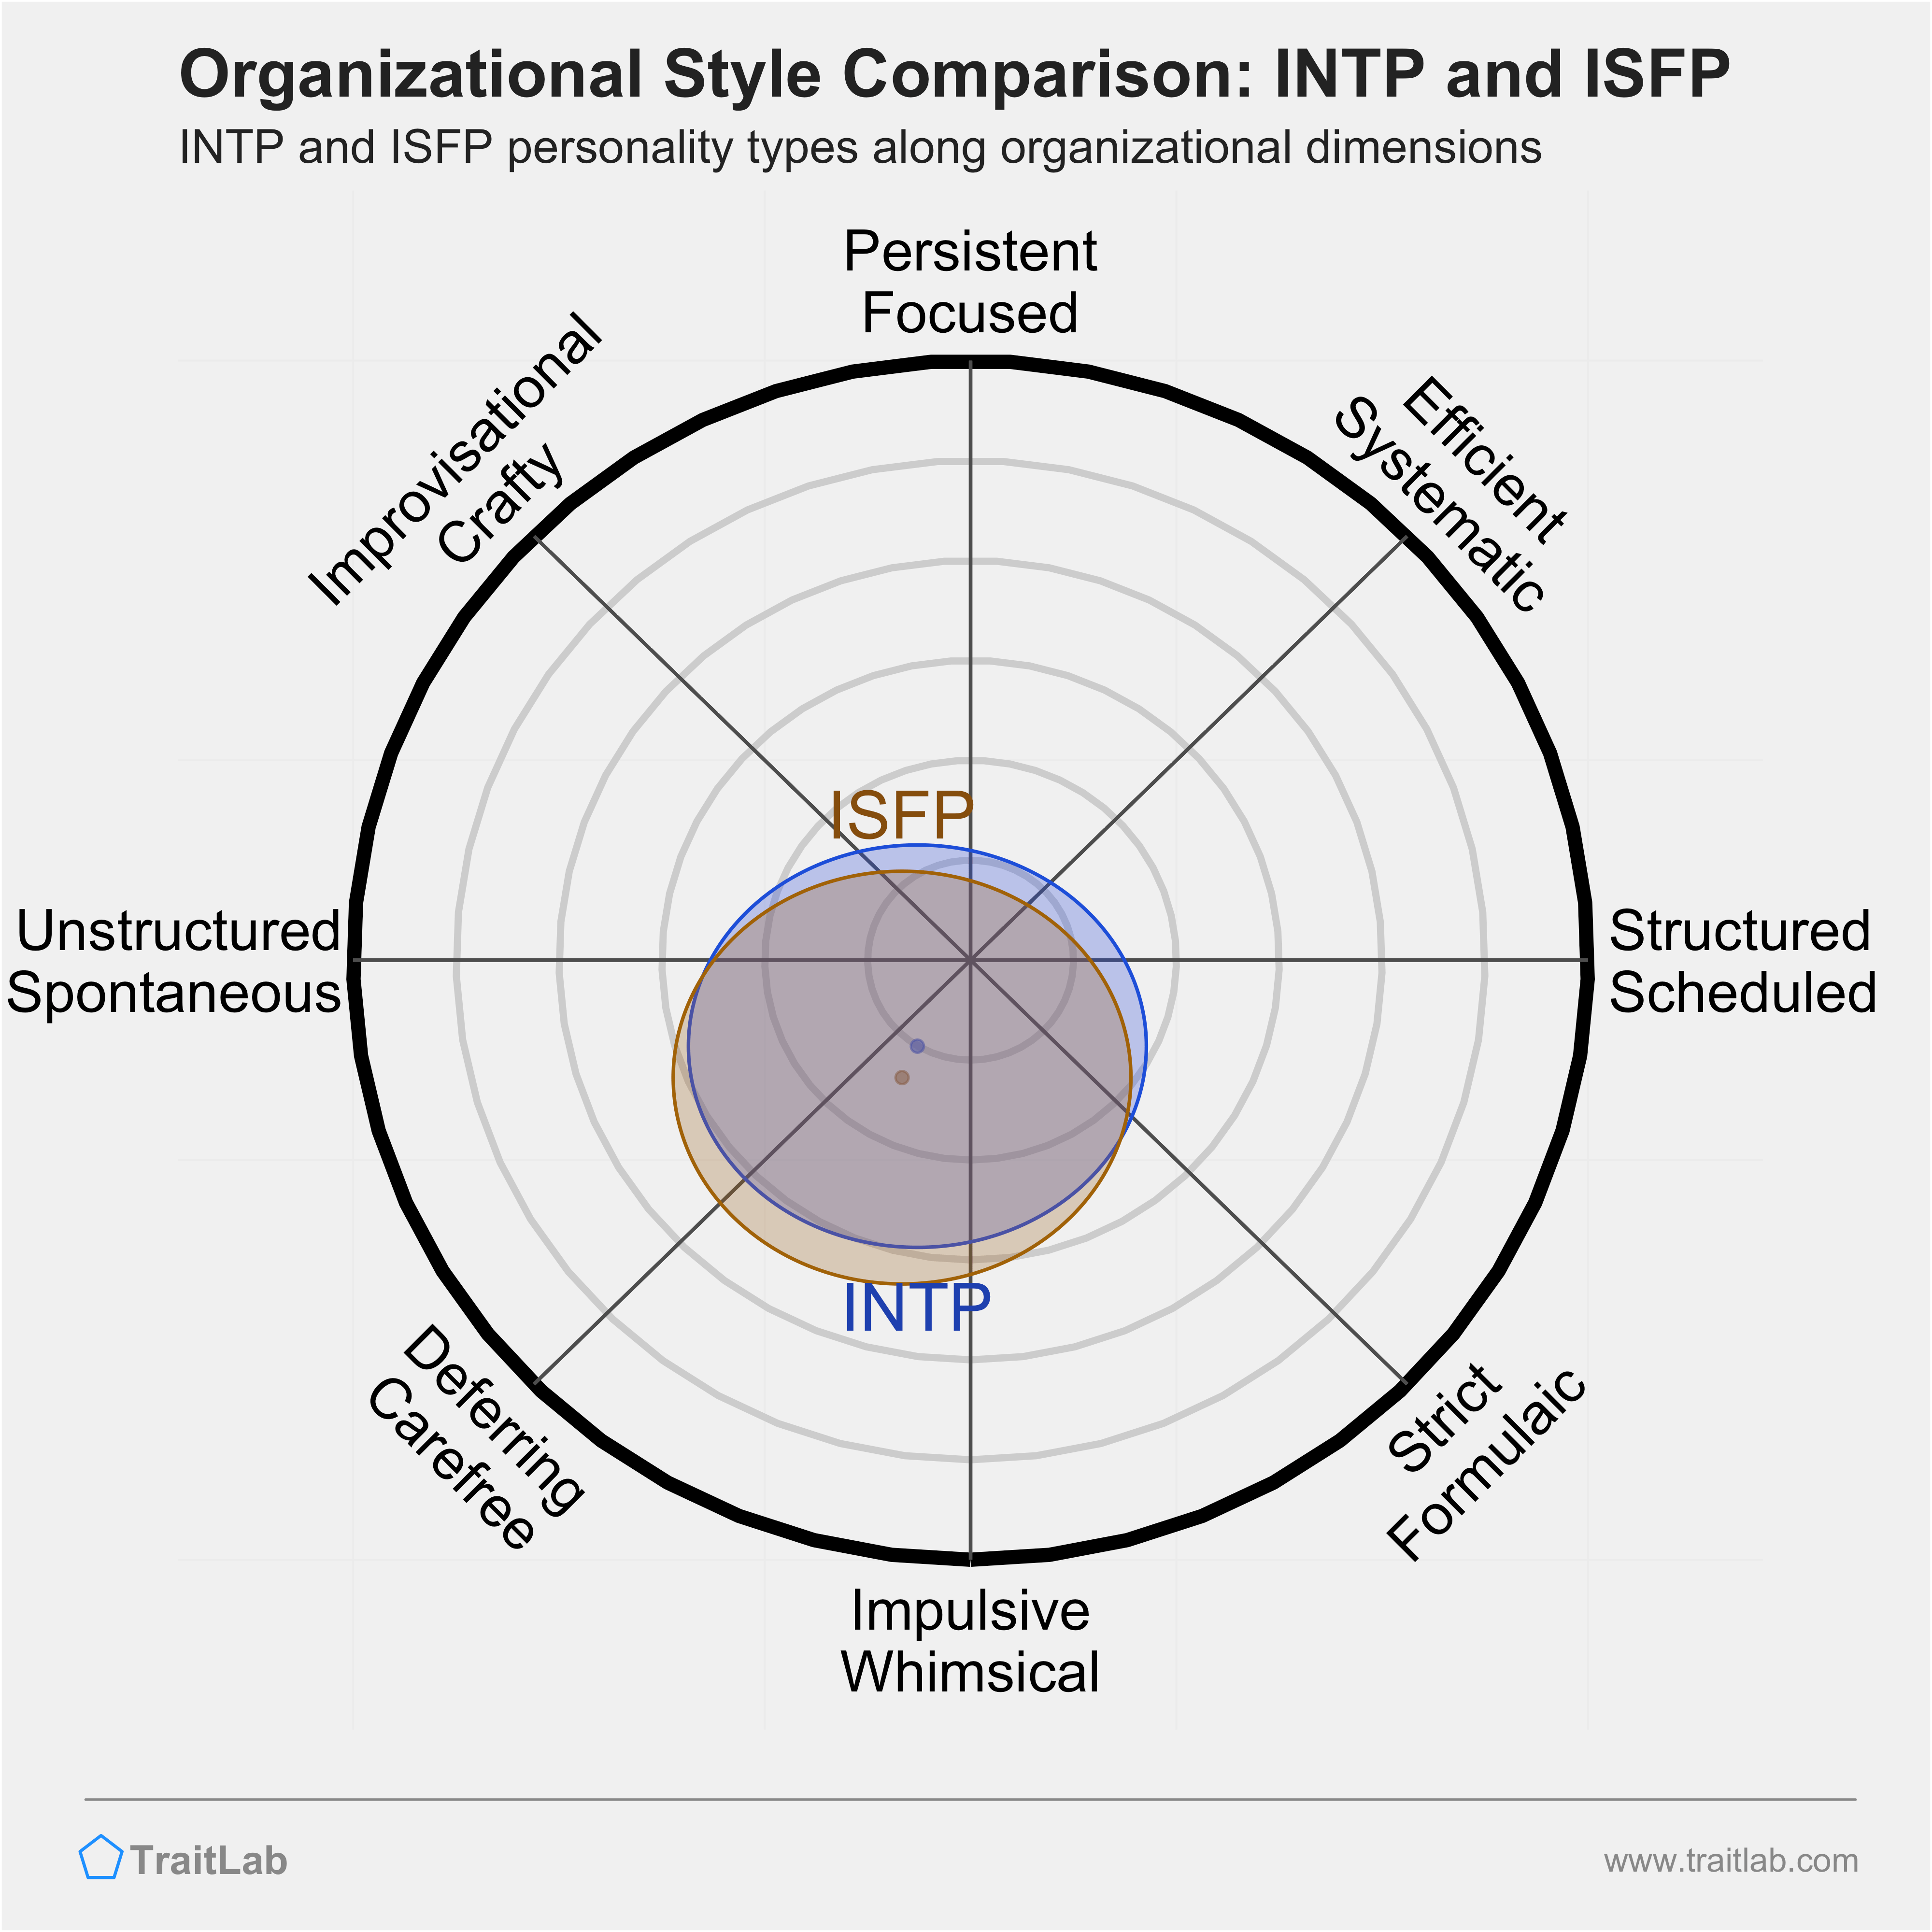 INTP and ISFP comparison across organizational dimensions